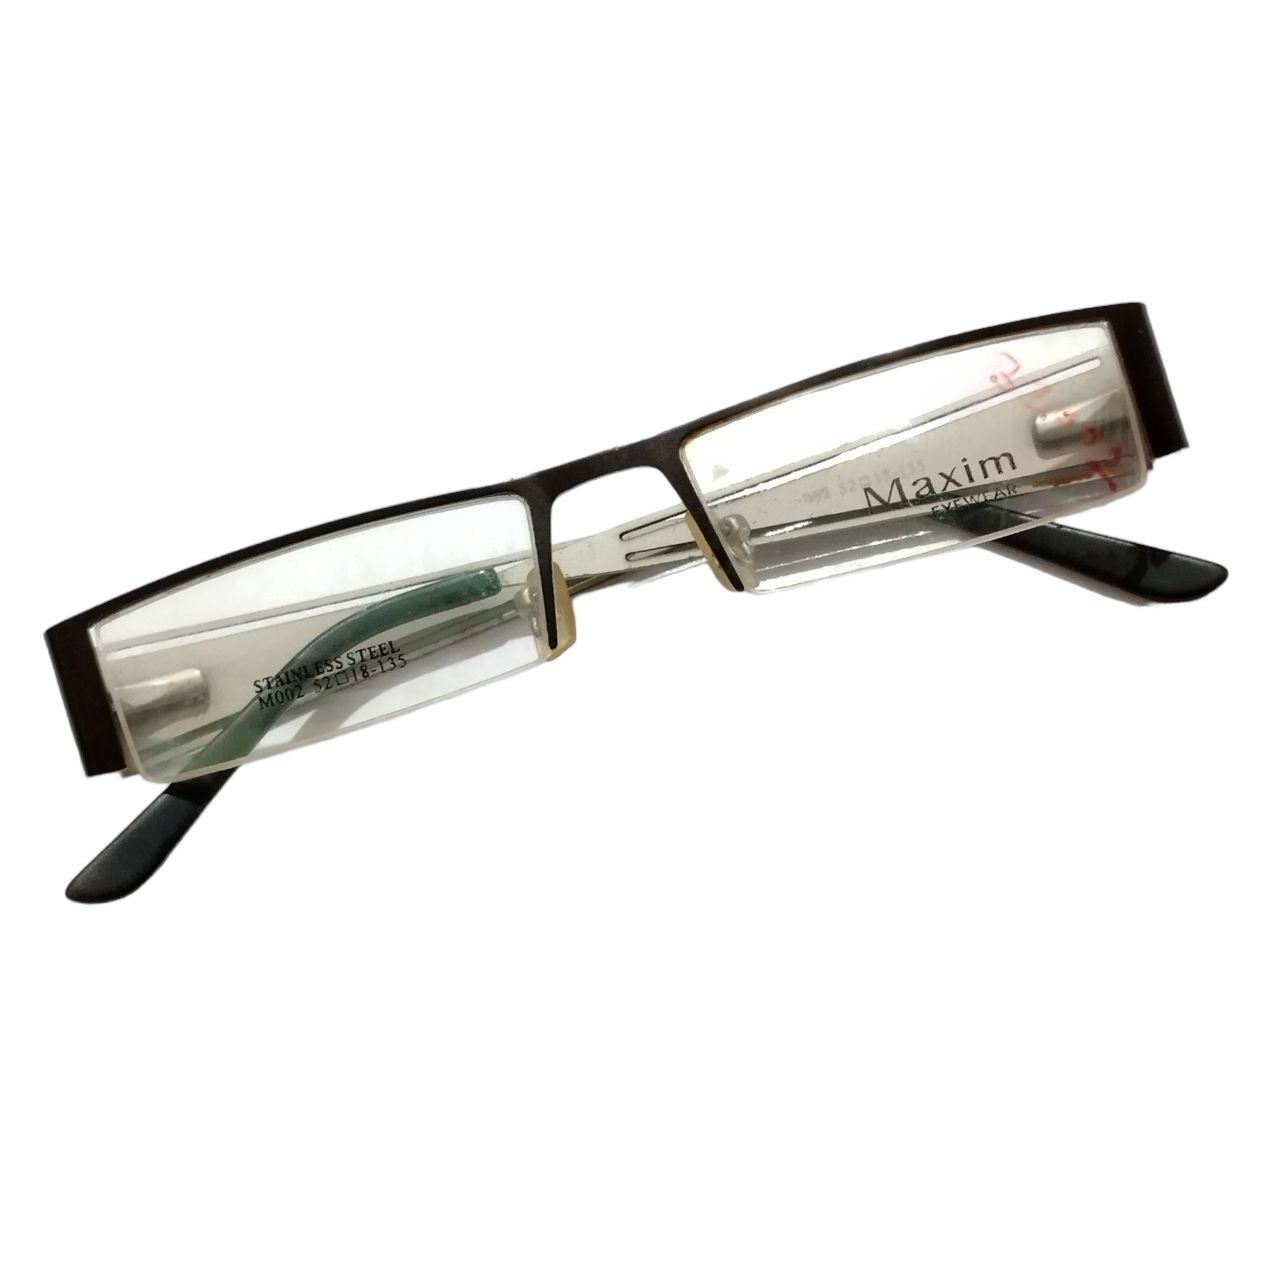 Rectangle Black Supra Stainless Steel Spectacle Frame Glasses